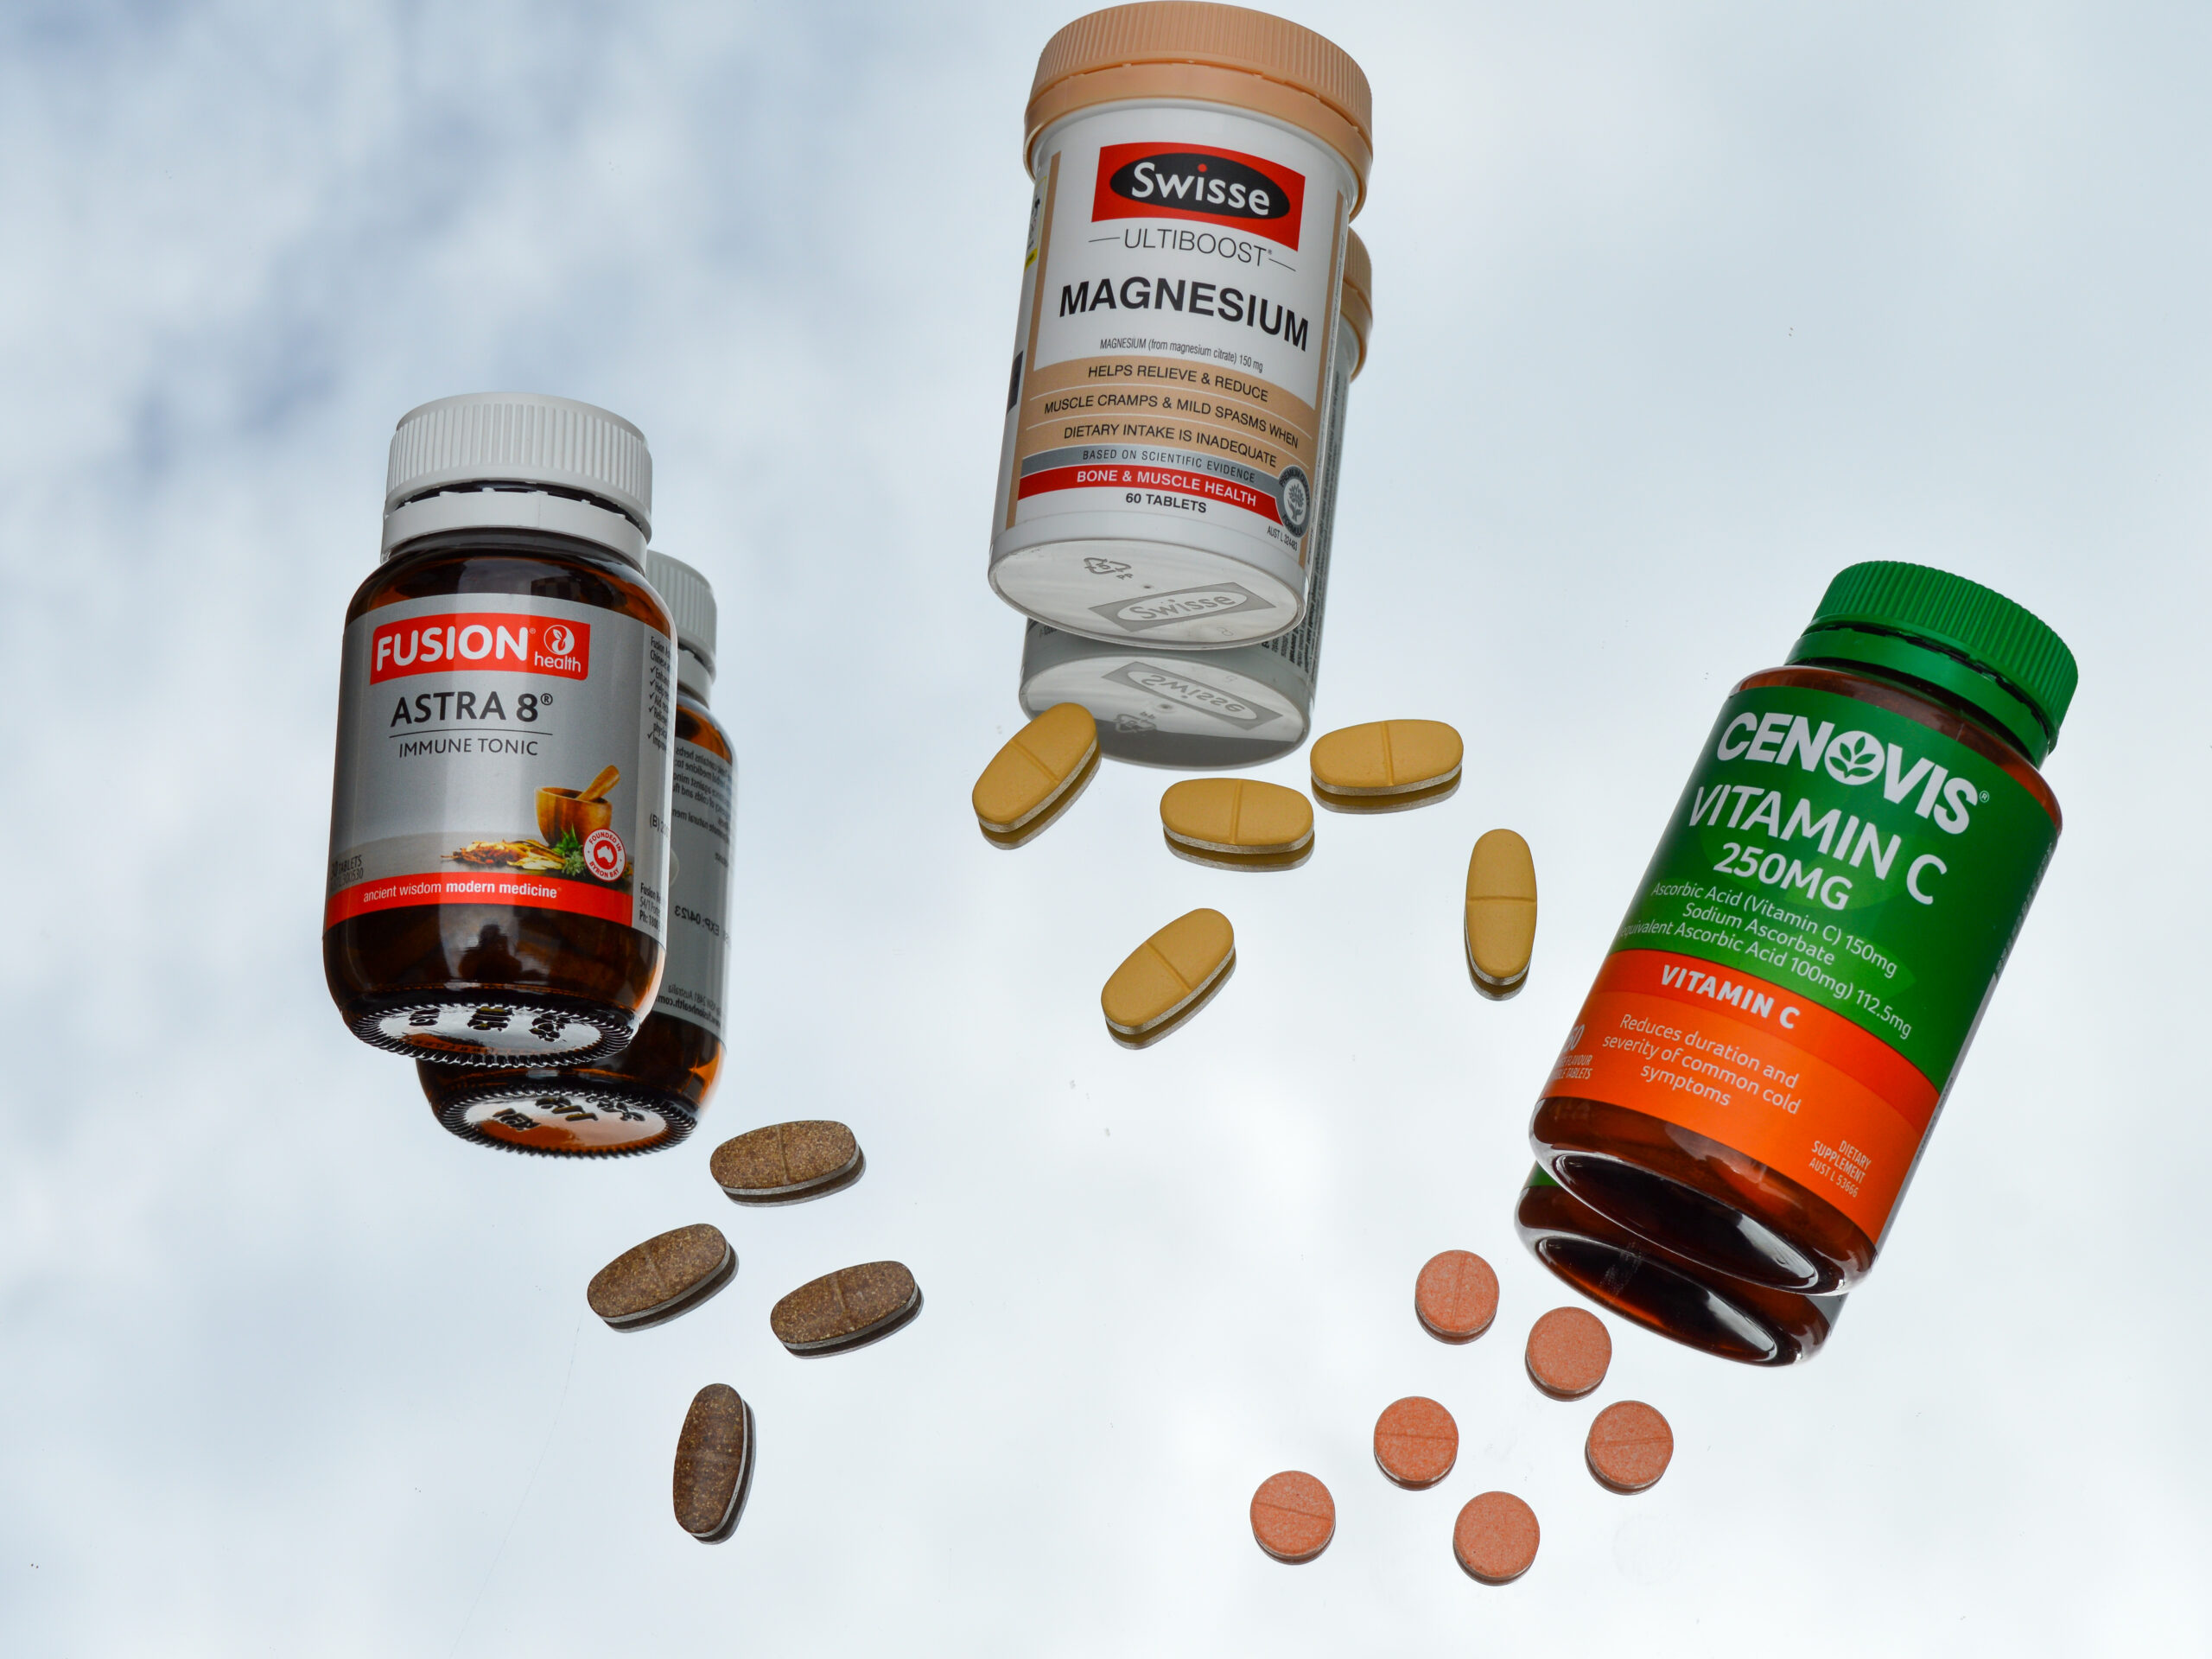 A-Z of Vitamins | WholeLife Pharmacy & Healthfoods